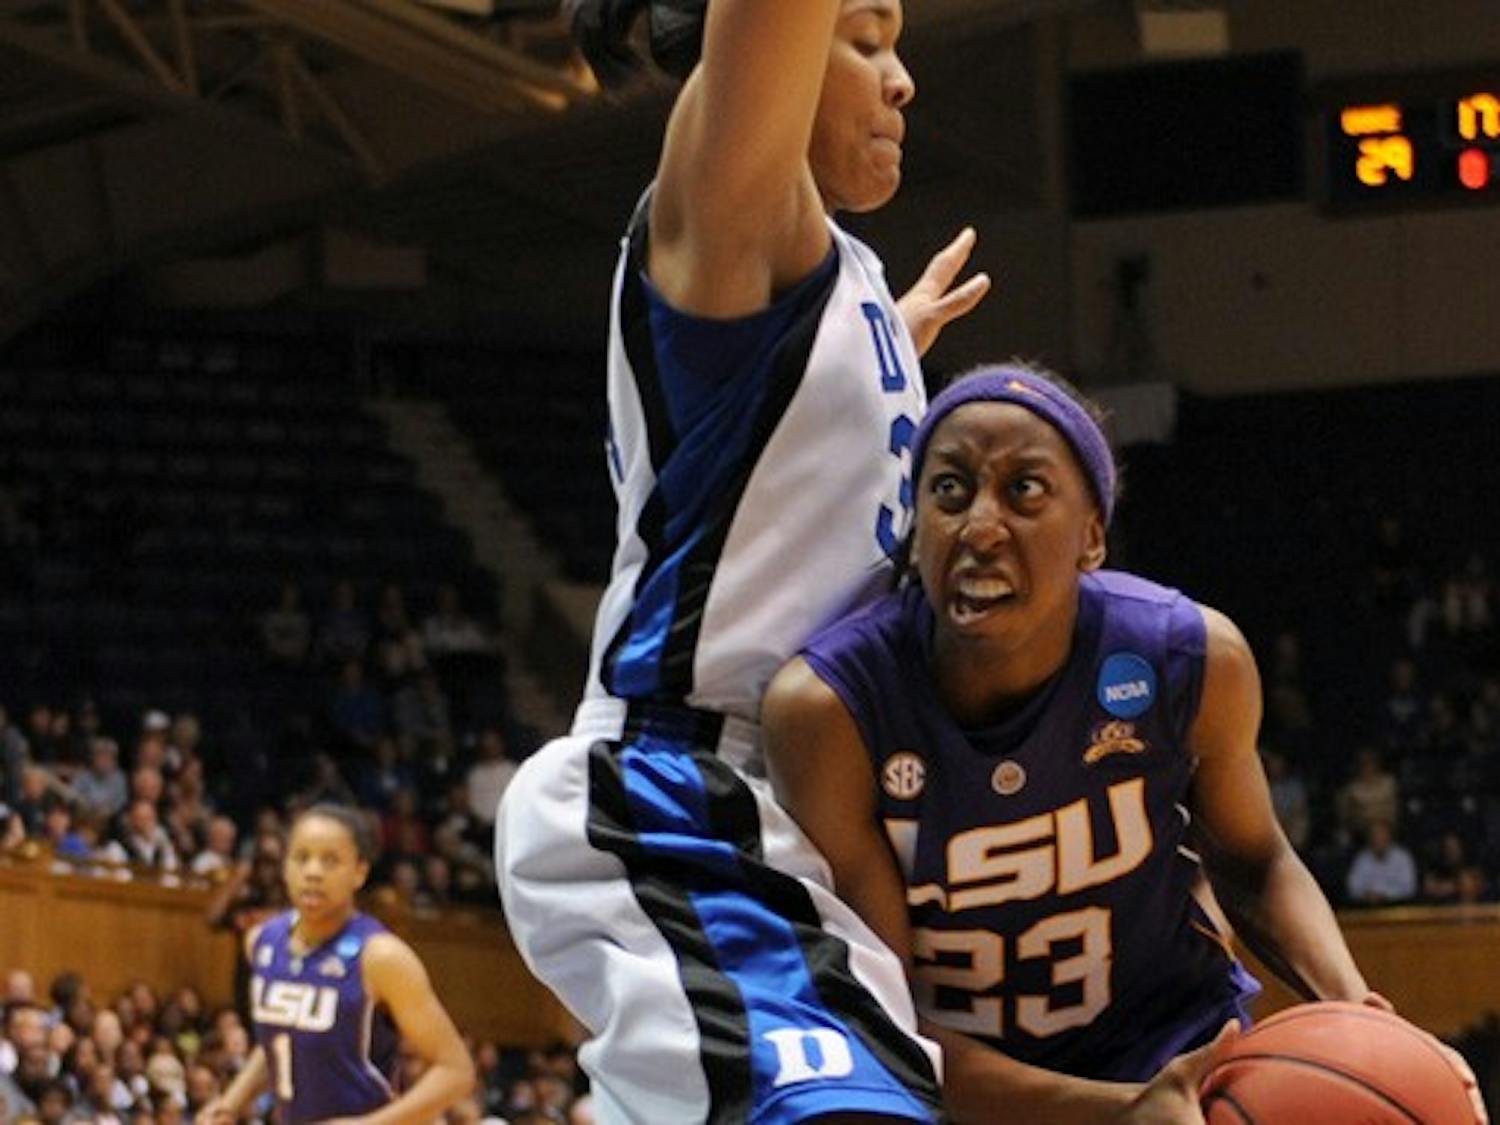 LSU guard Allison Hightower scored 11 quick points before a Duke defensive switch to a zone shut her down.